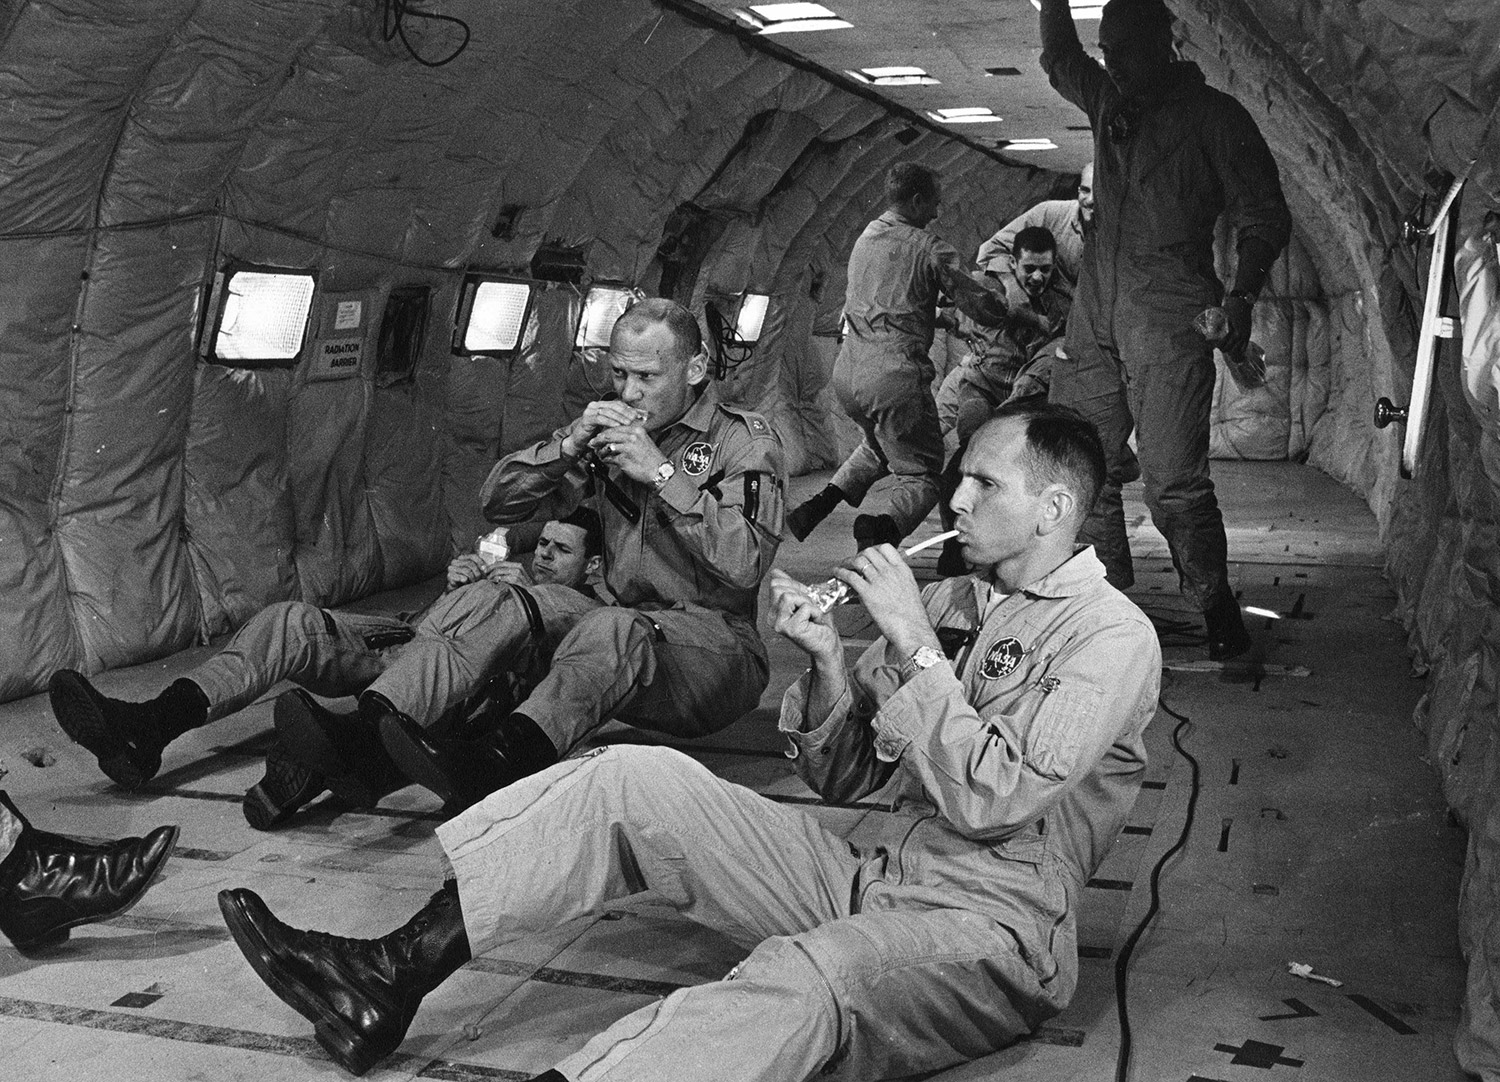 While flying parabolic arcs to simulate weightlessness aboard a KC-135 at Wright-Patterson AFB in August of 1964, Buzz Aldrin attempts to consume a container of space food. Fellow NASA astronauts Charlie Bassett (left) and Ted Freeman (right) are also trying to eat the specially prepared food. Credit: NASA via Retro Space Images